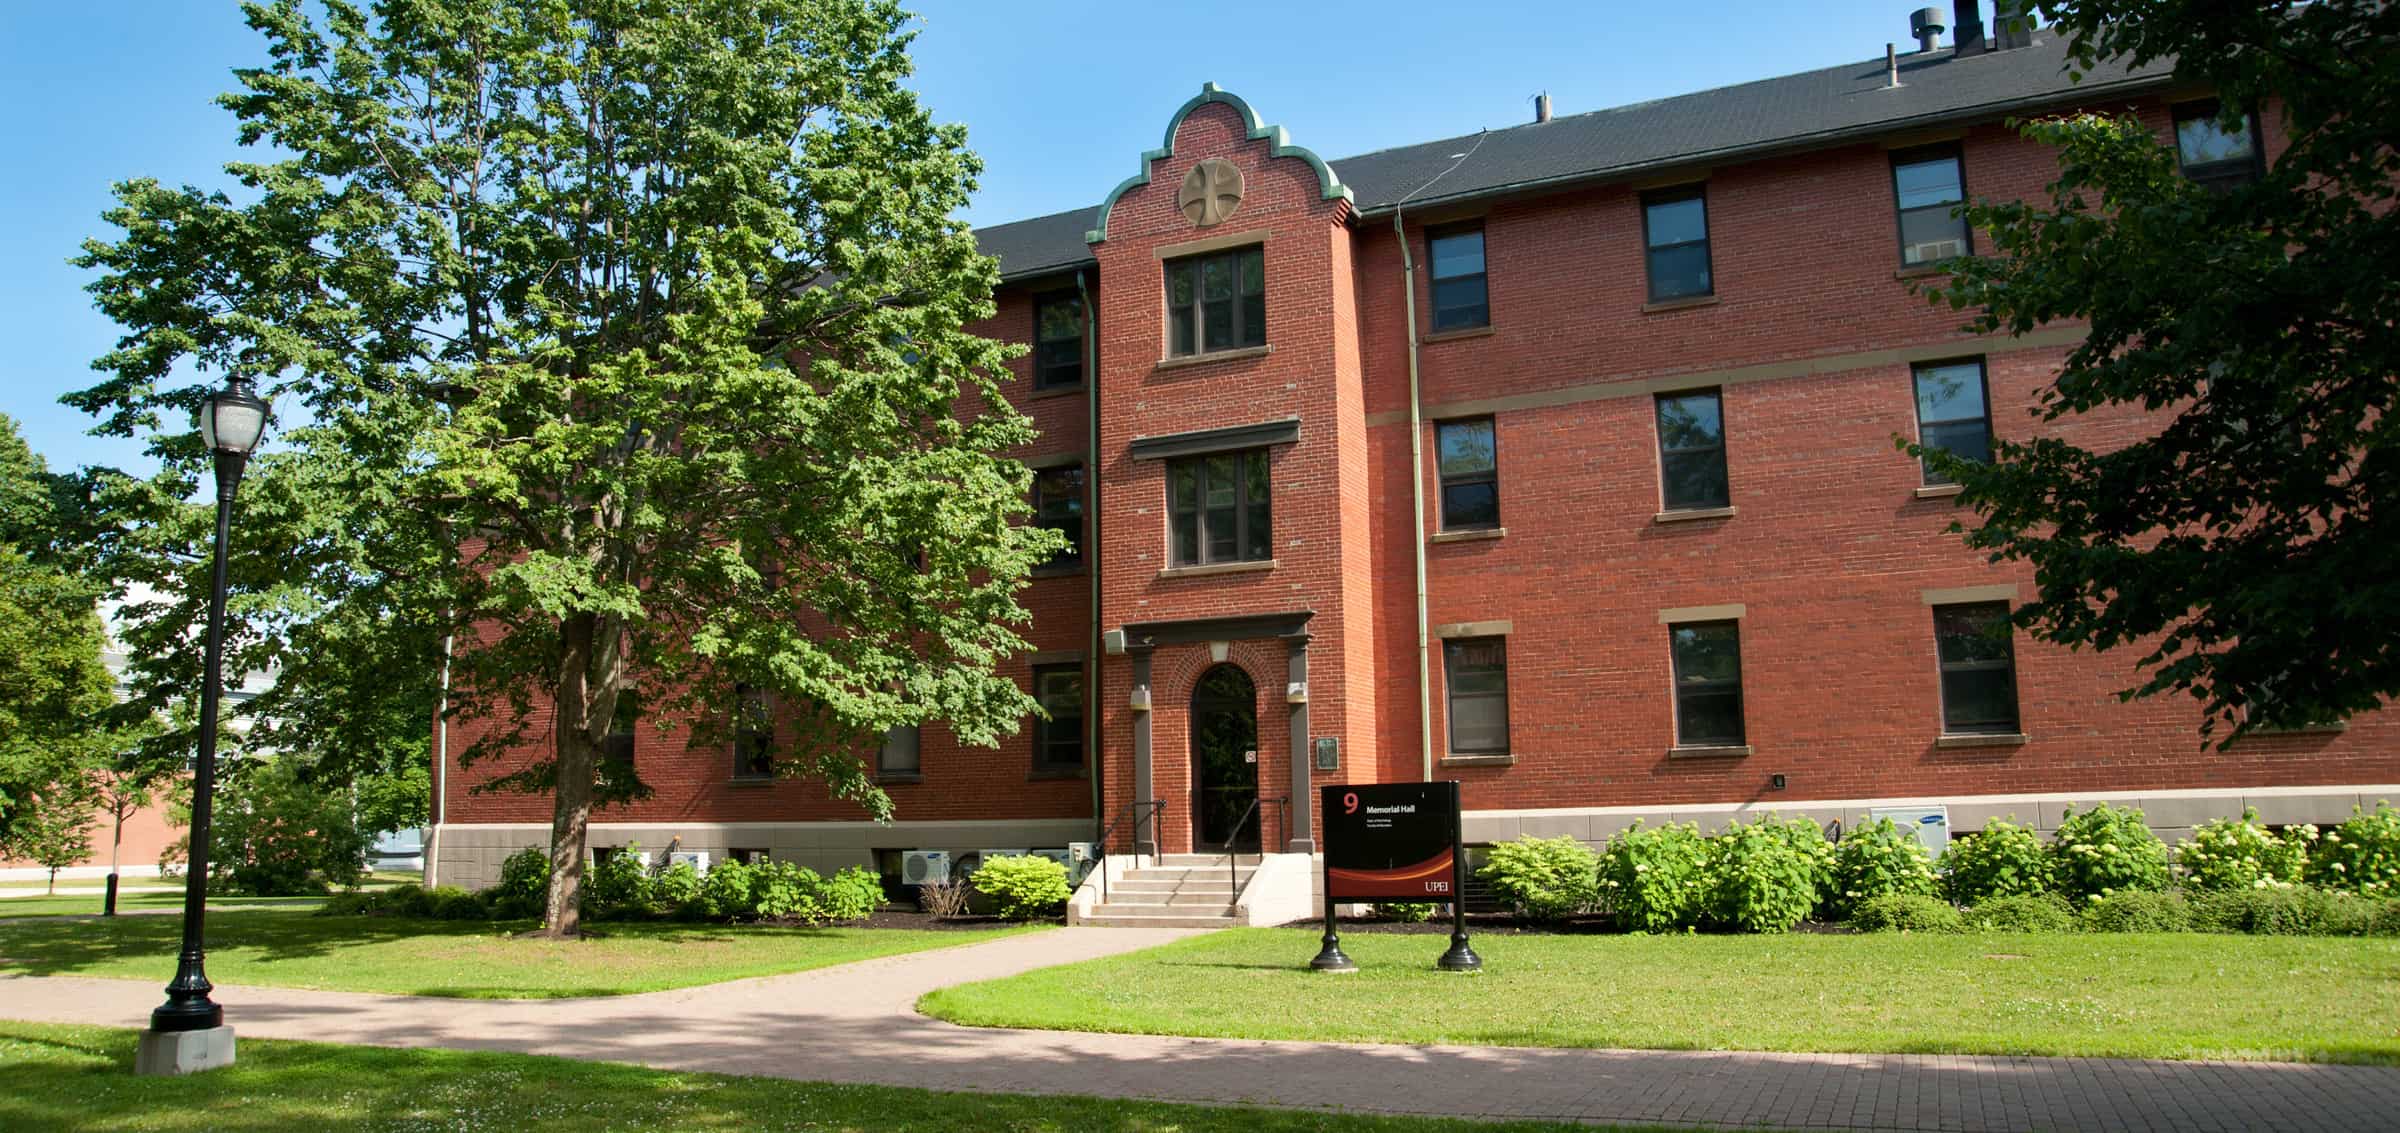 The Memorial Building at the University of Prince Edward Island campus.